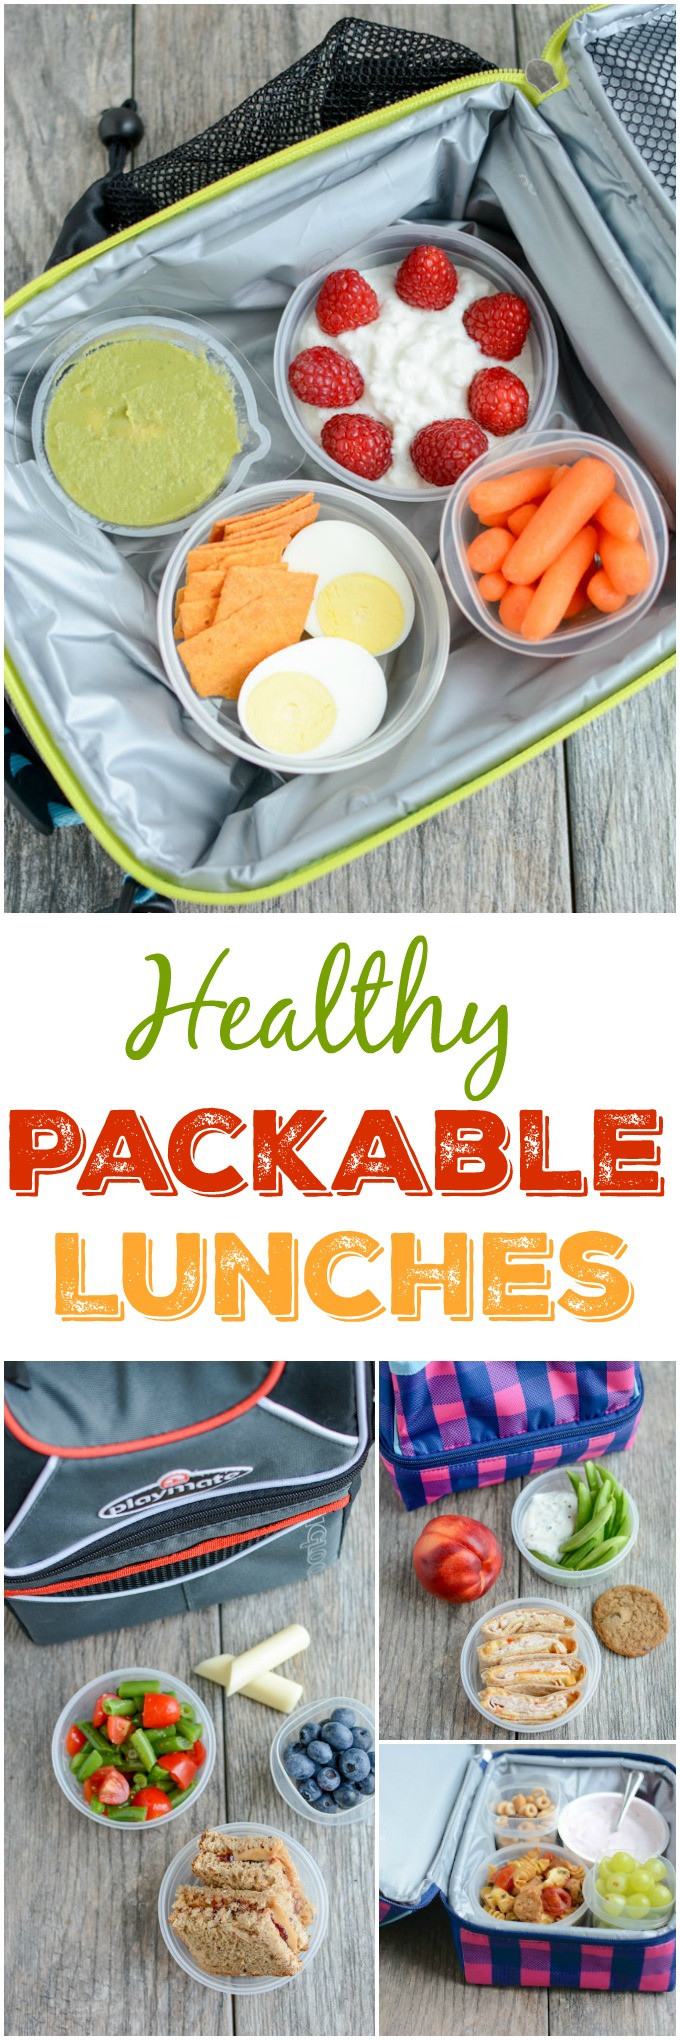 Healthy Packable Lunches
 Healthy Packable Lunches For Kids